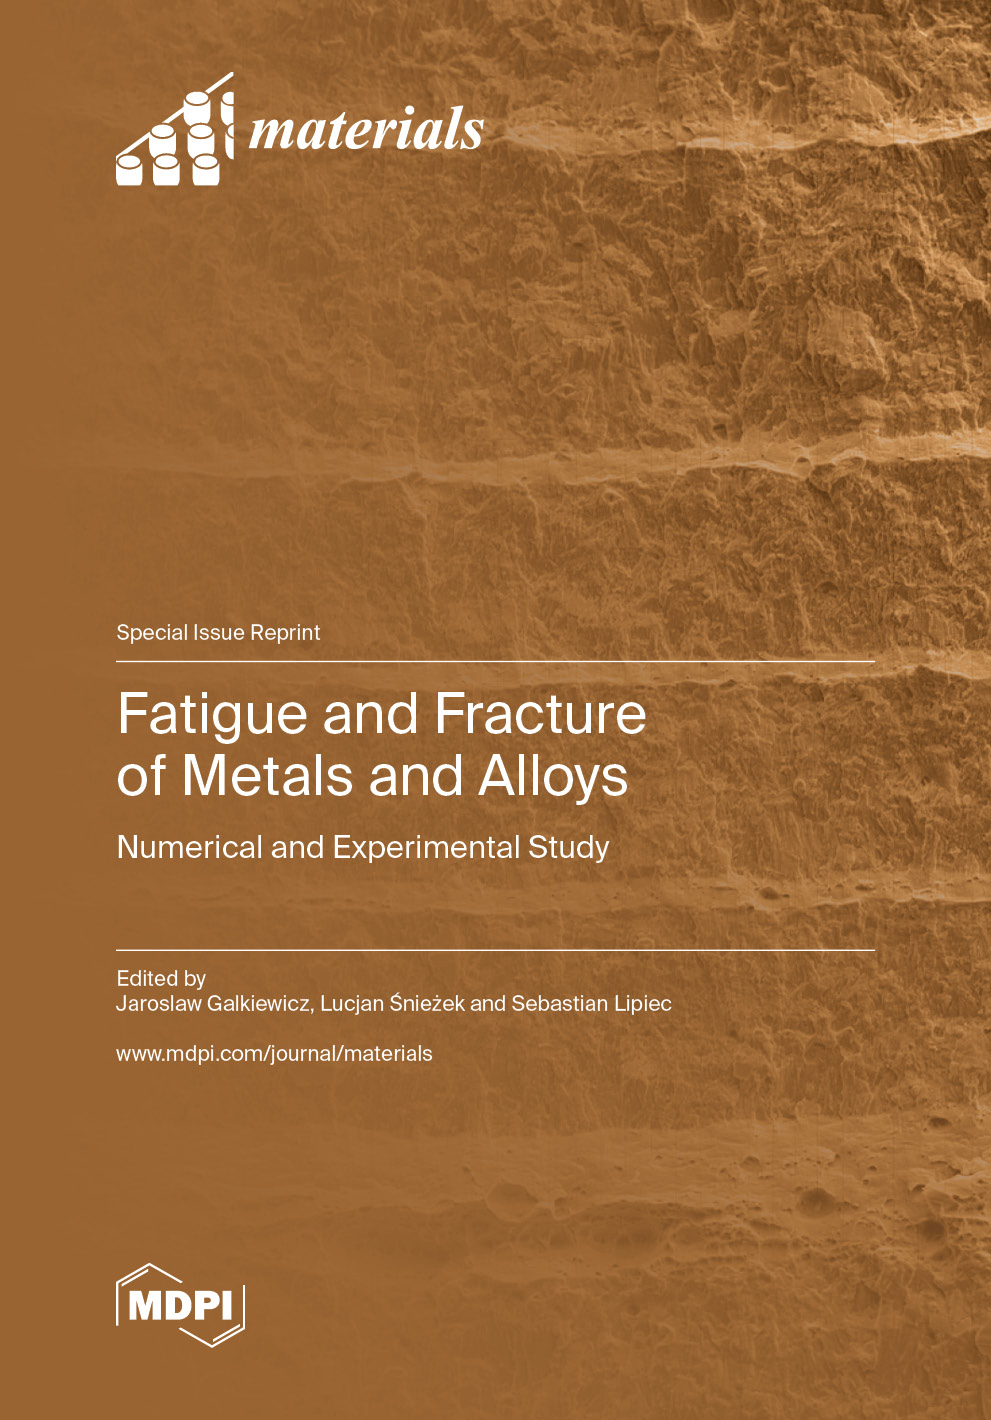 Book cover: Fatigue and Fracture of Metals and Alloys: Numerical and Experimental Study